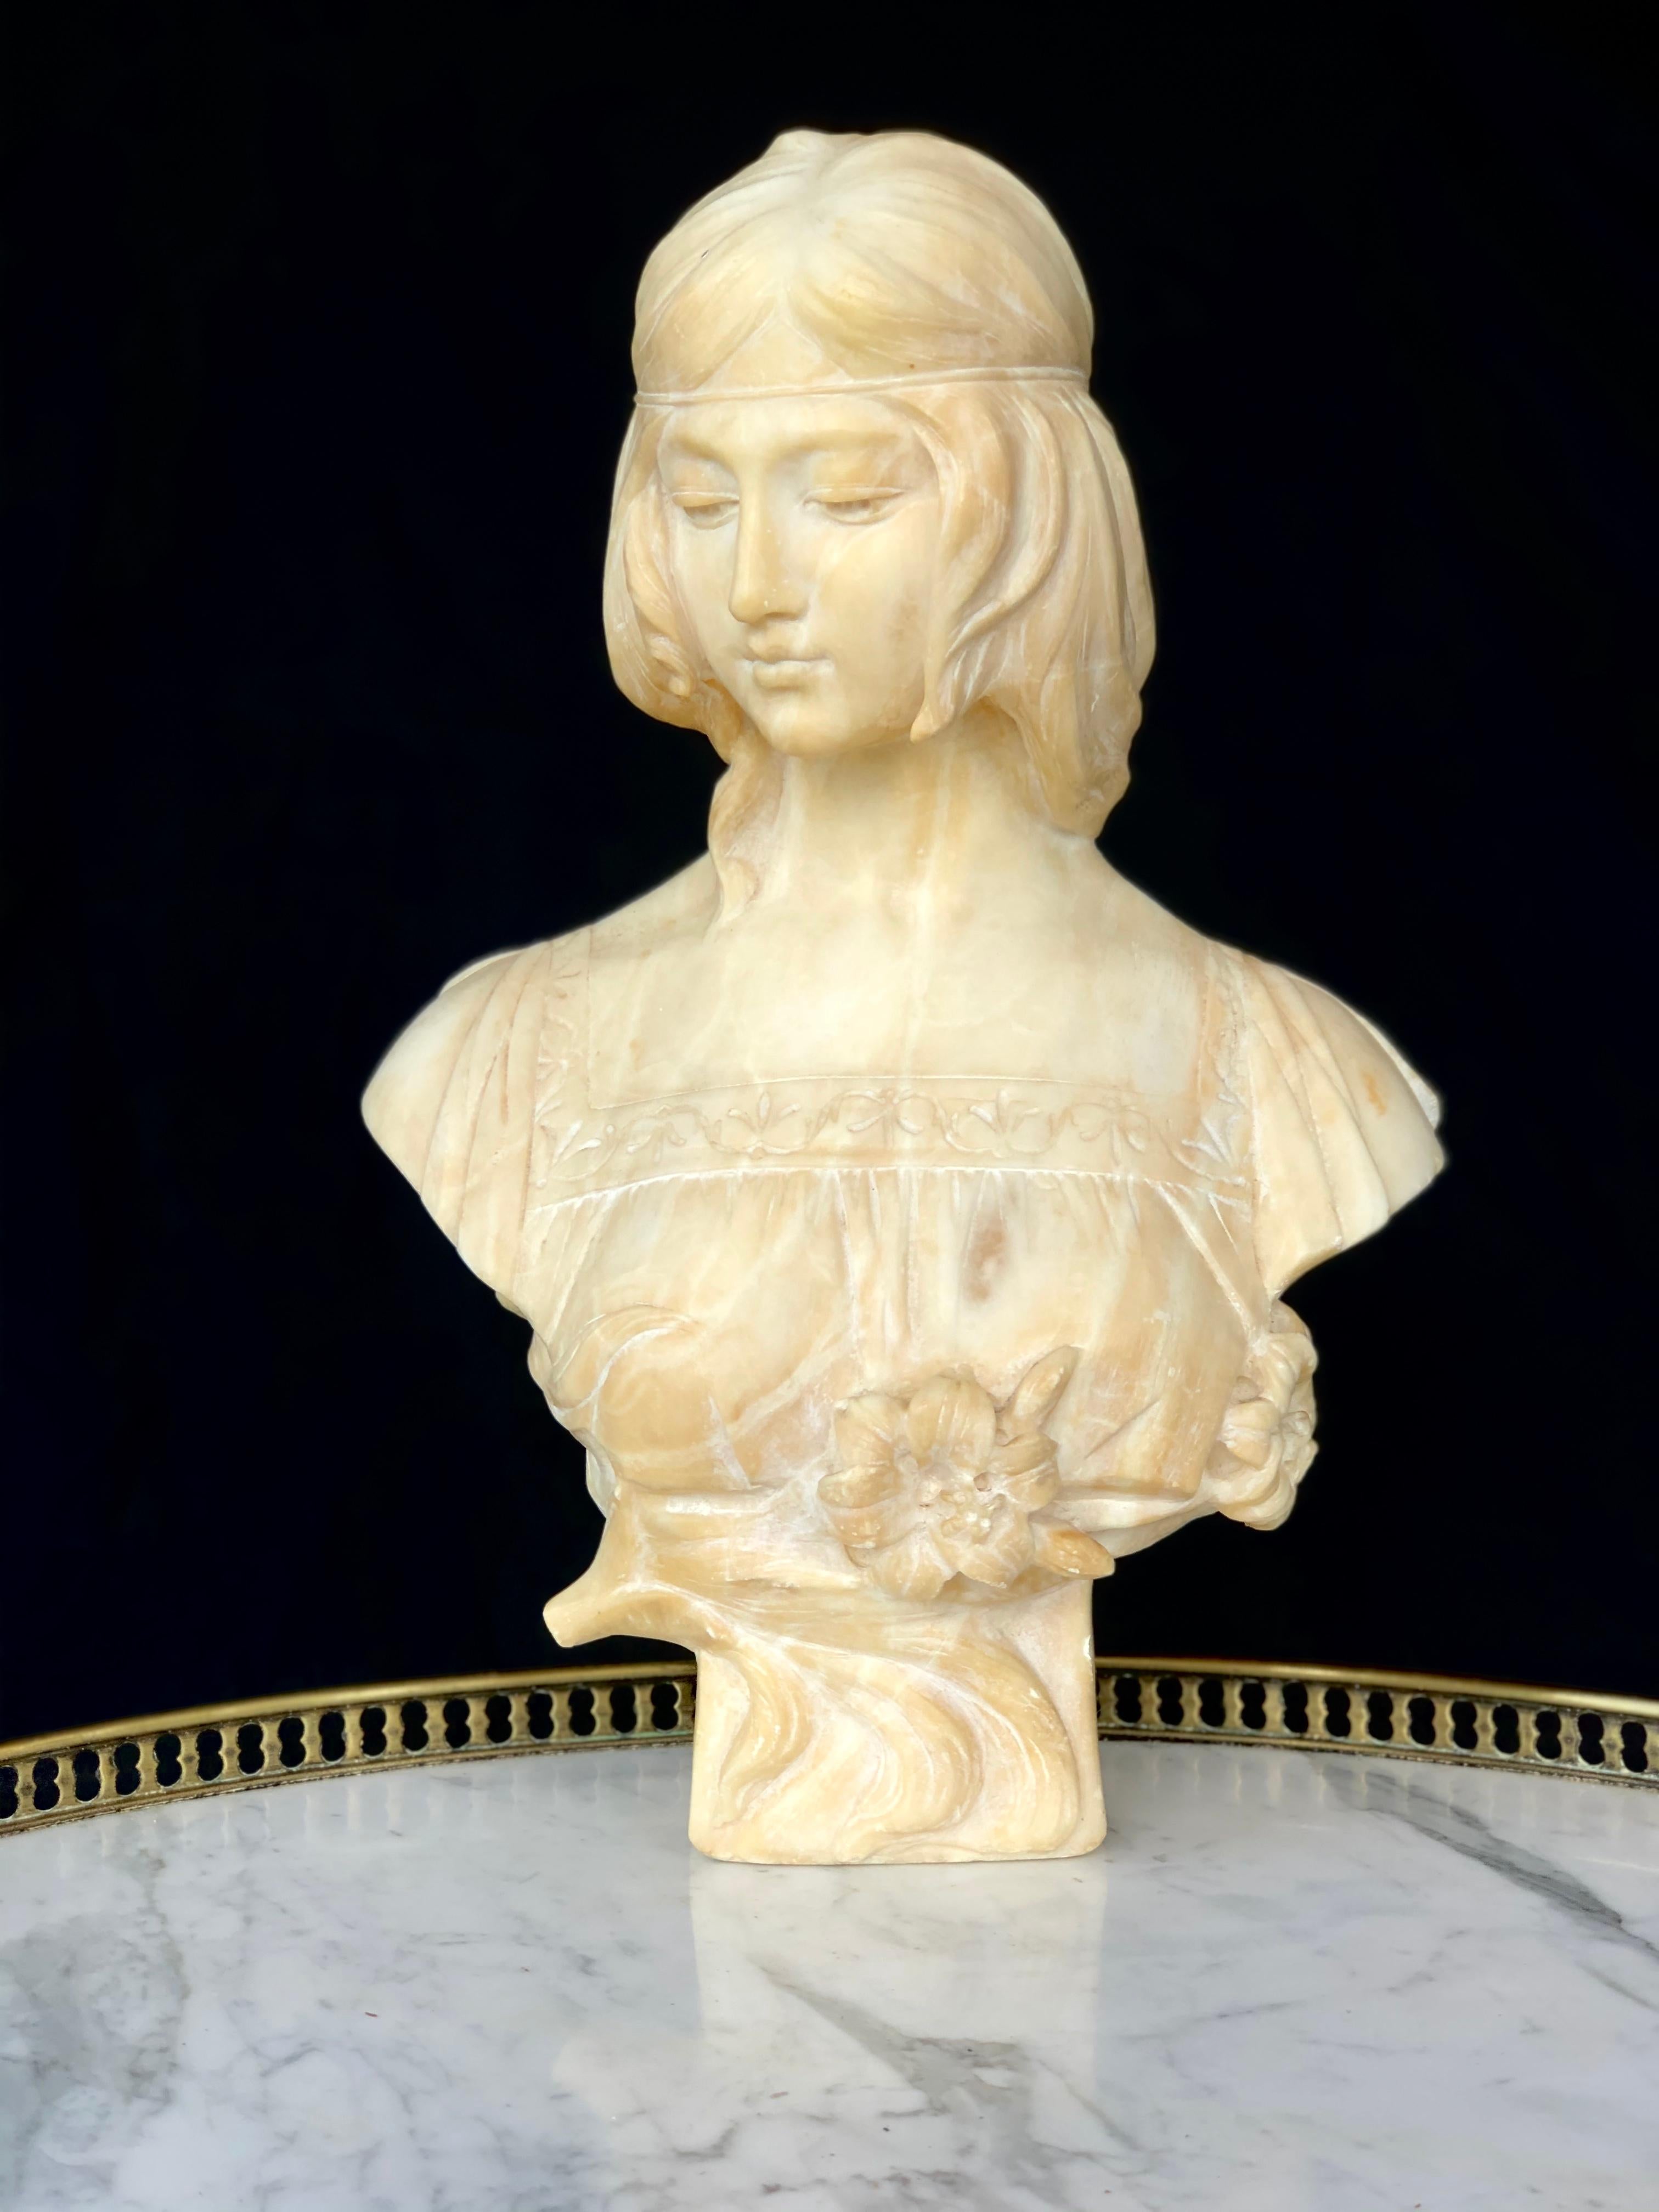 Wonderfully detailed Art Nouveau style alabaster carved bust of a woman with a sheer dress wearing a head band by famous Italian artist Antonio Frilli. Signed “A. Frilli Firenze